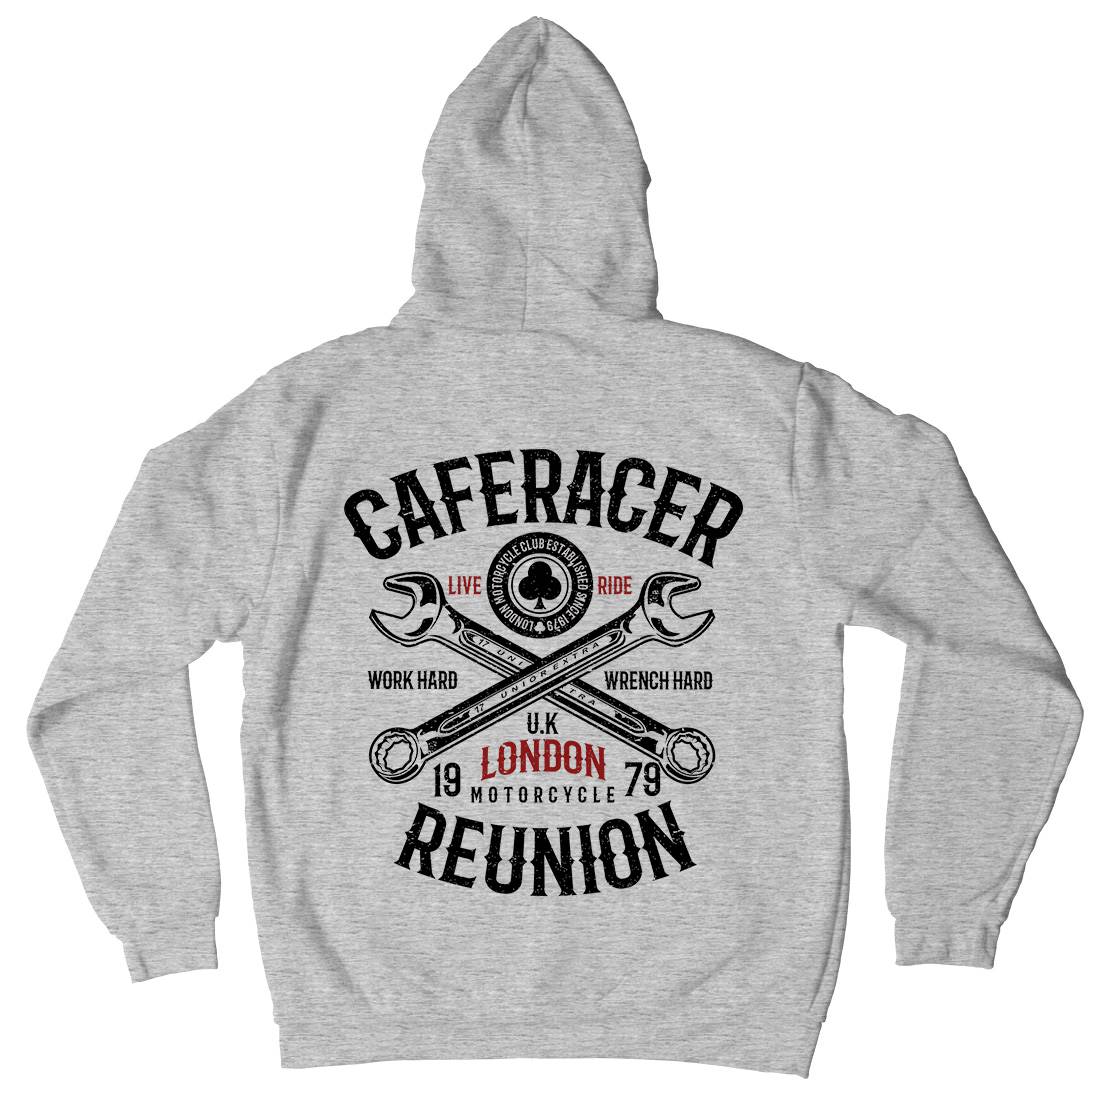 Caferacer Reunion Mens Hoodie With Pocket Motorcycles A025